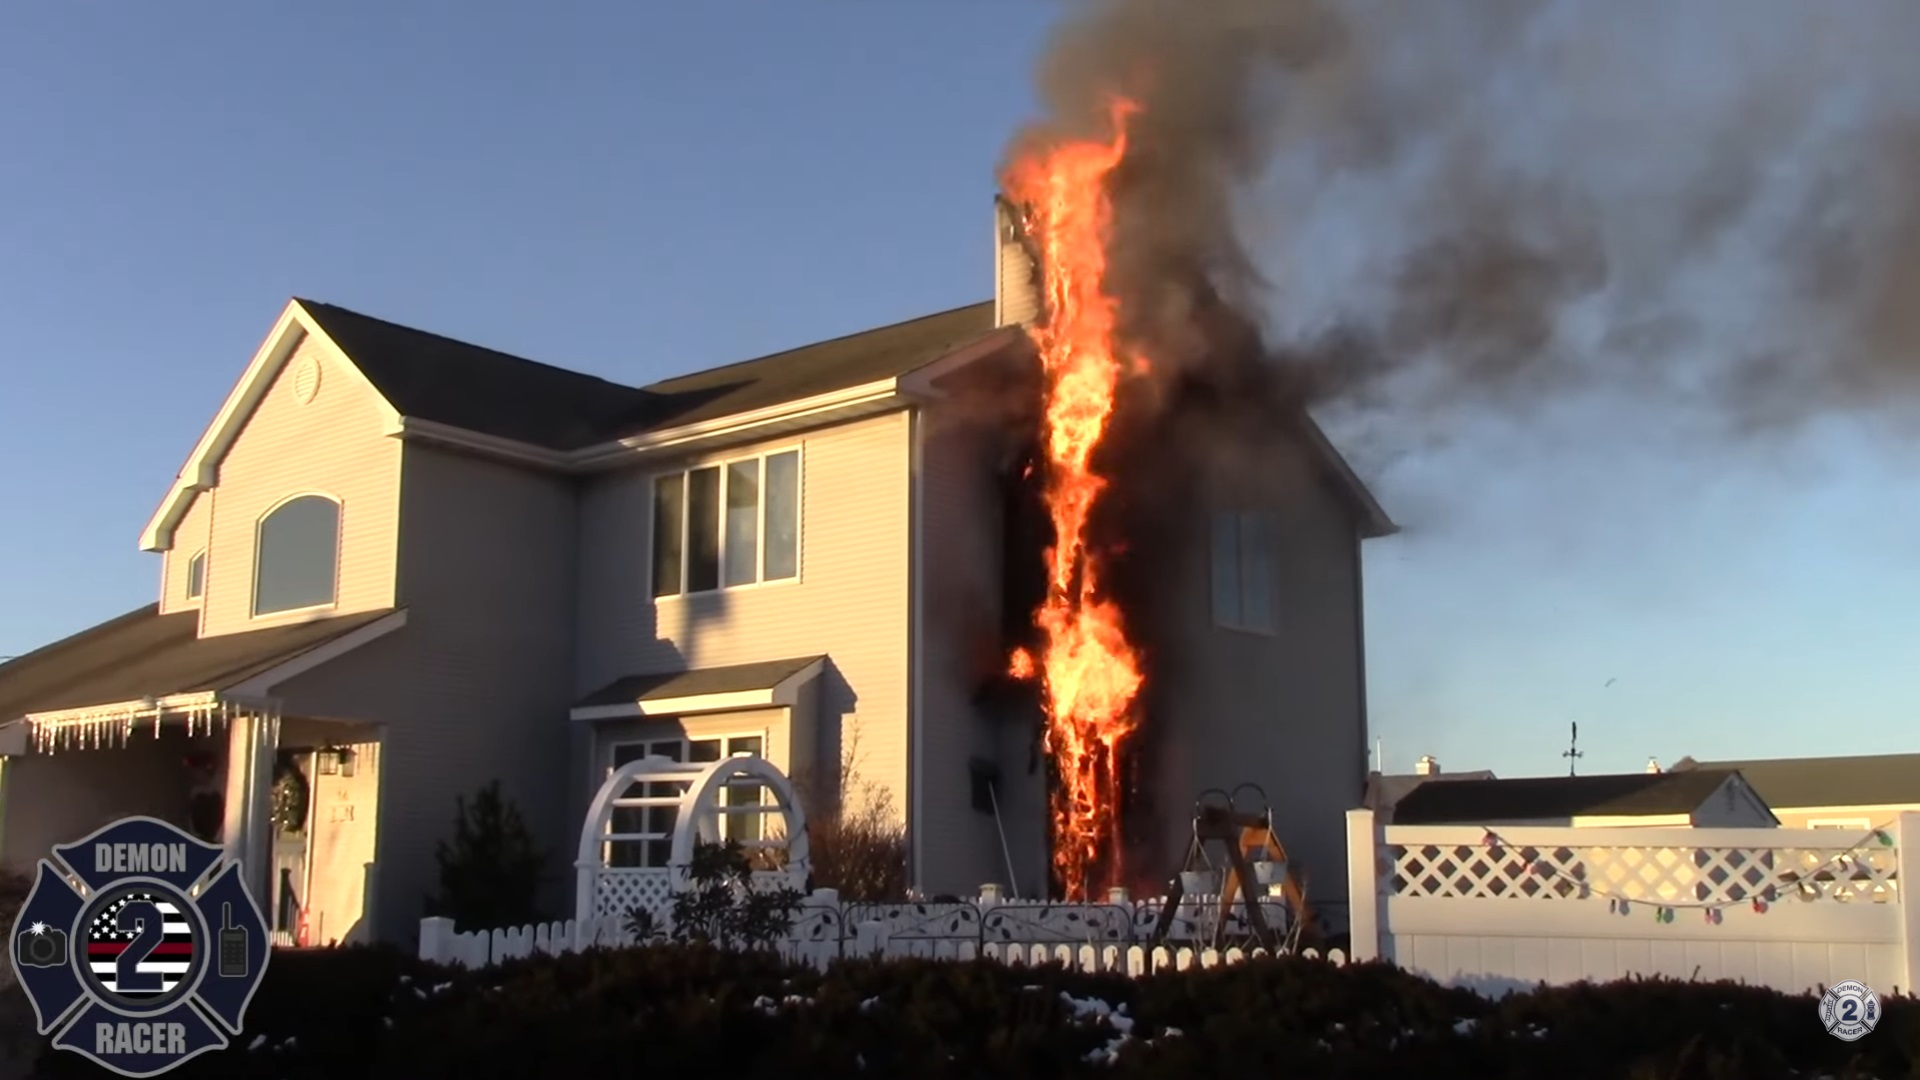 Pre-arrival video: House fire in New Jersey